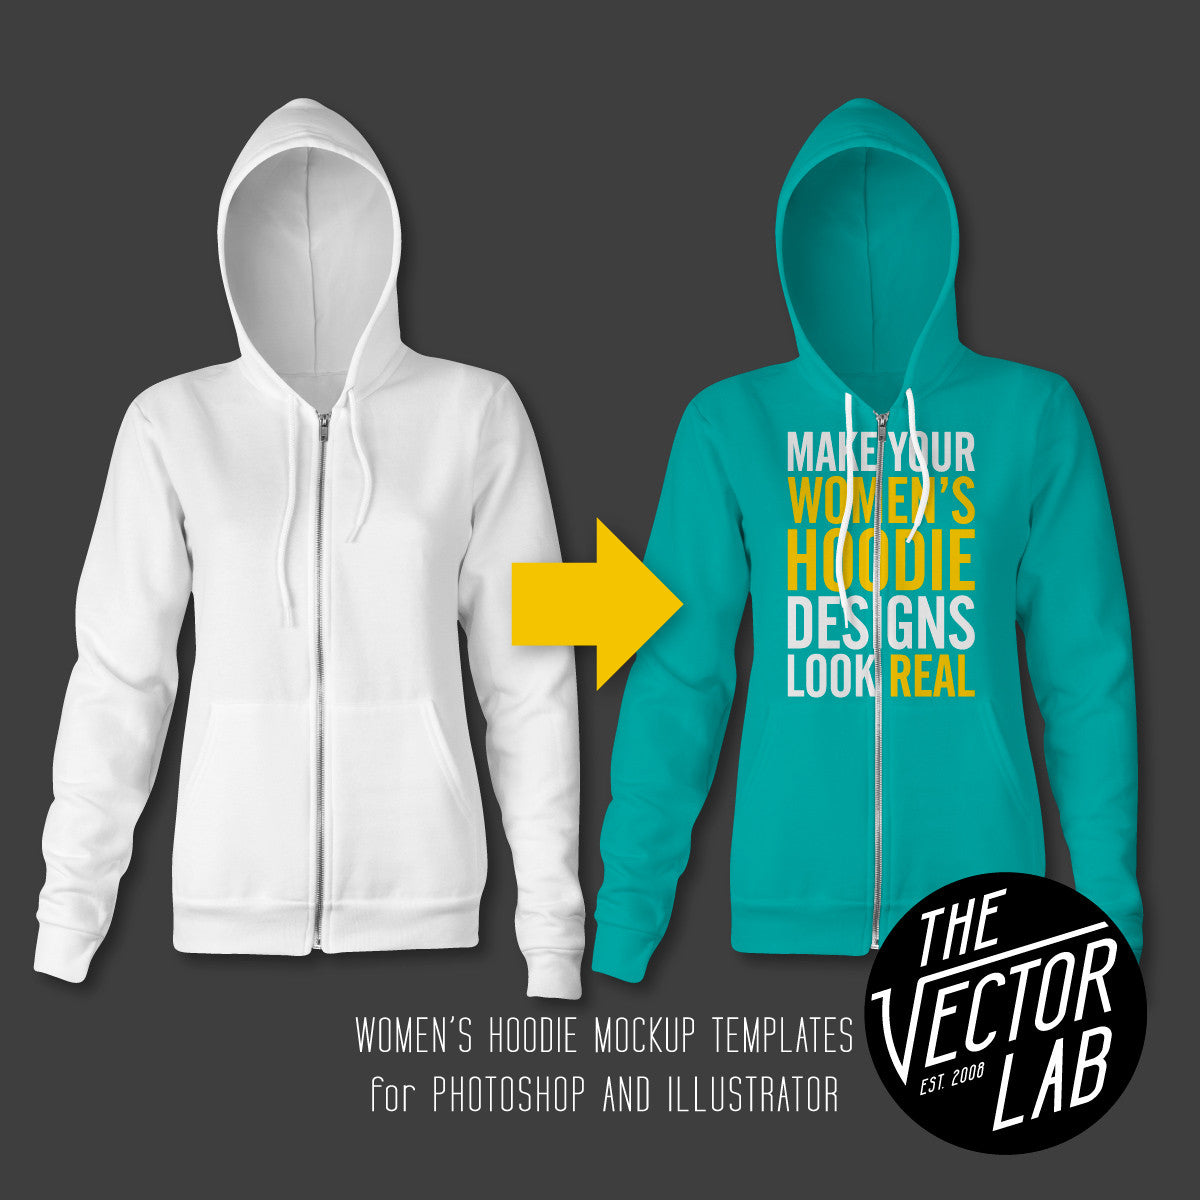 Download Women's Hoodie Mockup Templates - TheVectorLab PSD Mockup Templates